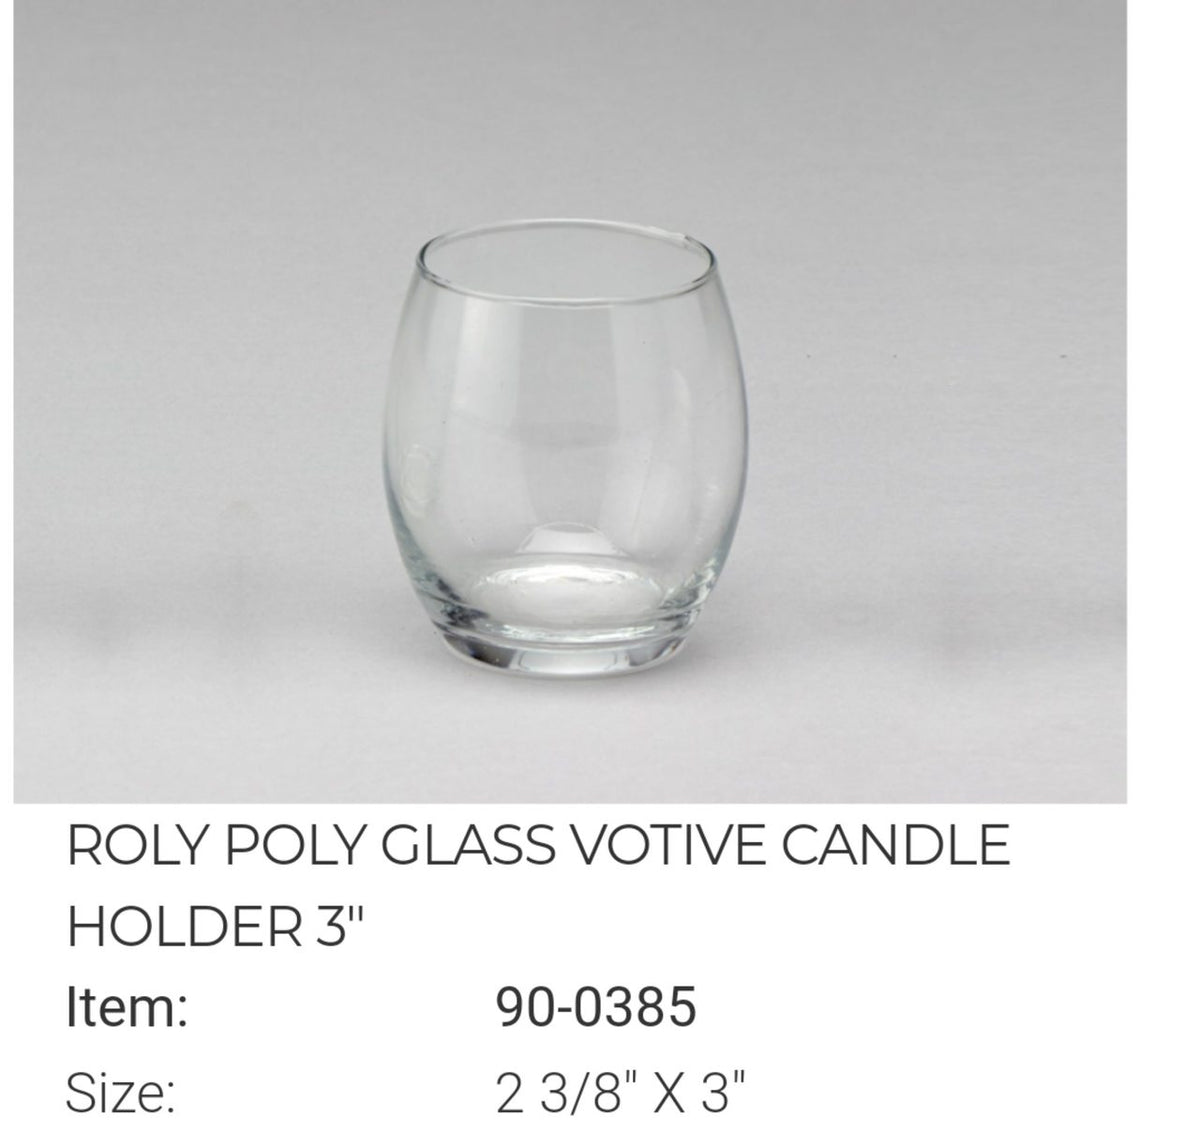 ROLY POLY GLASS VOTIVE CANDLE HOLDER